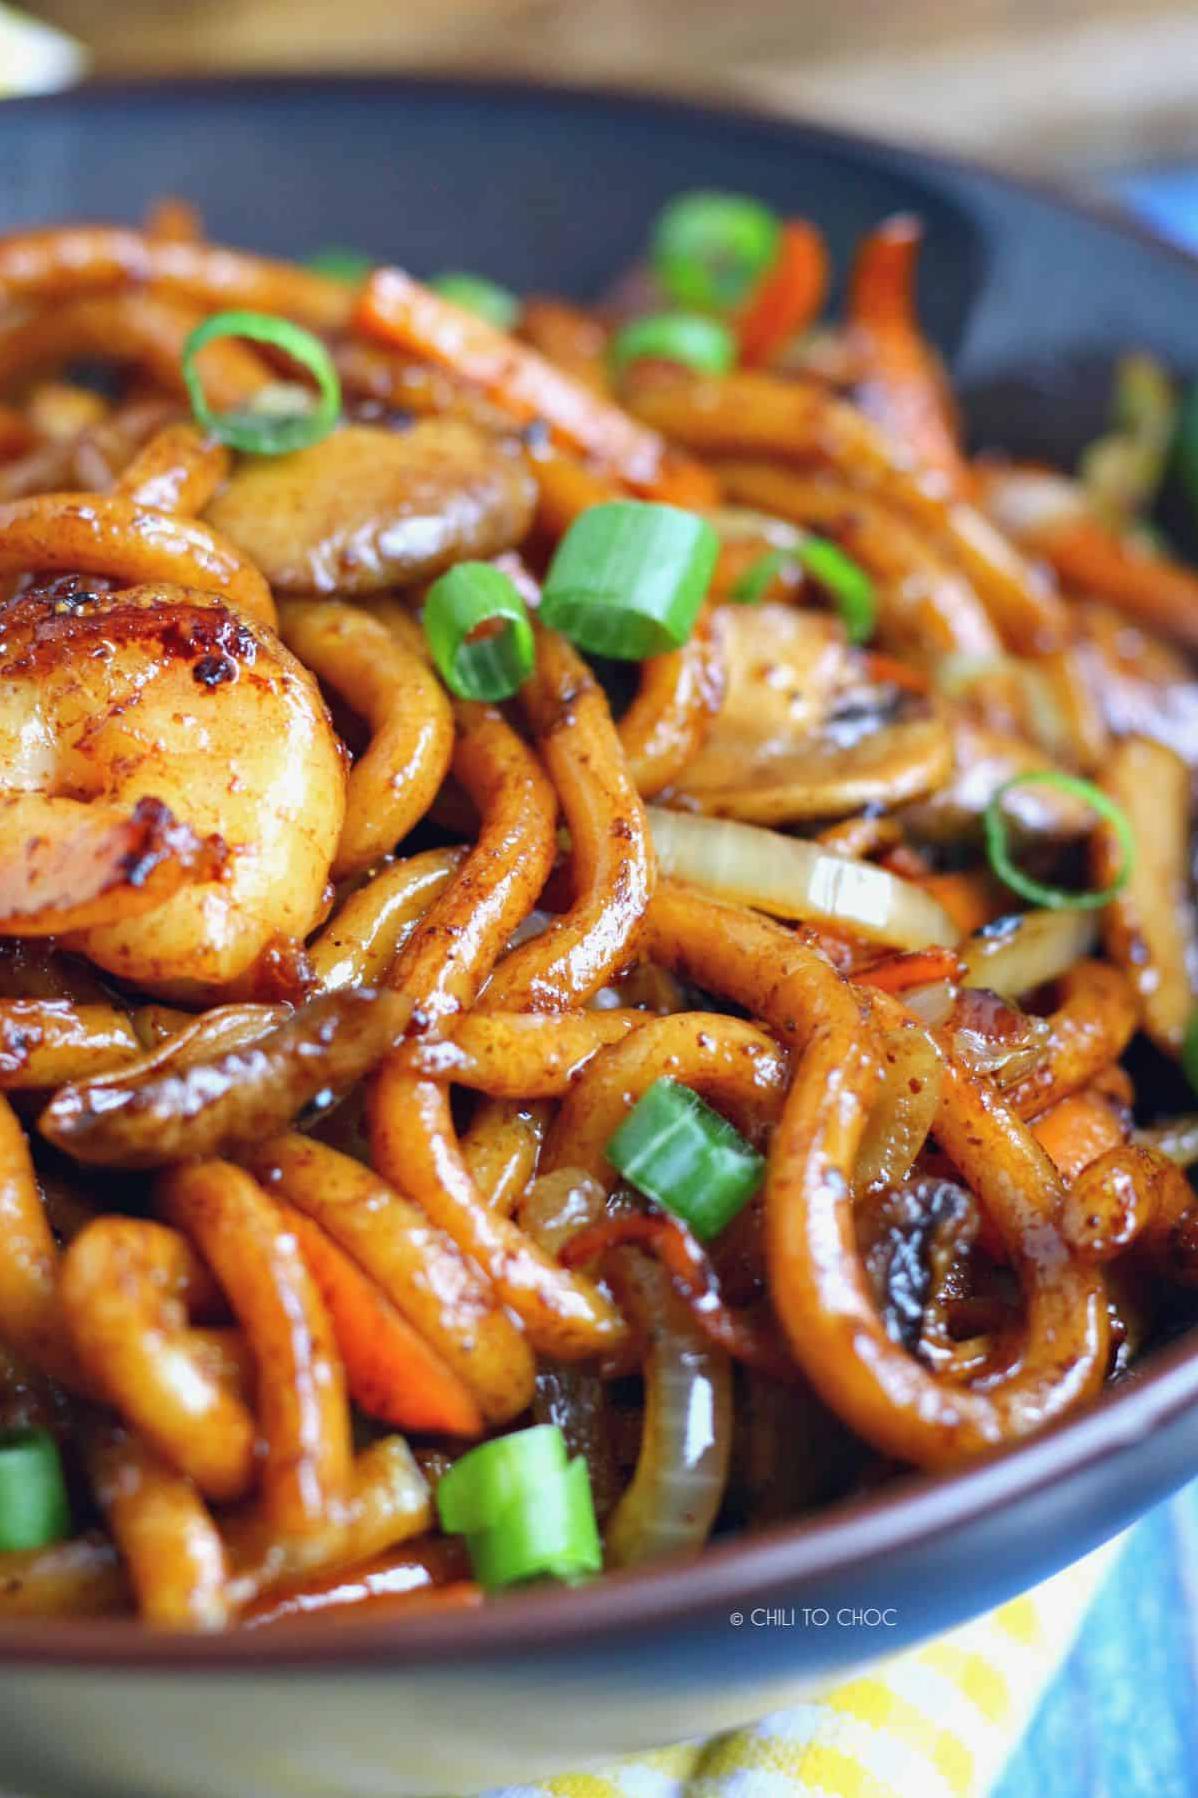  These saucy Japanese pan noodles are perfect for any dinner party!